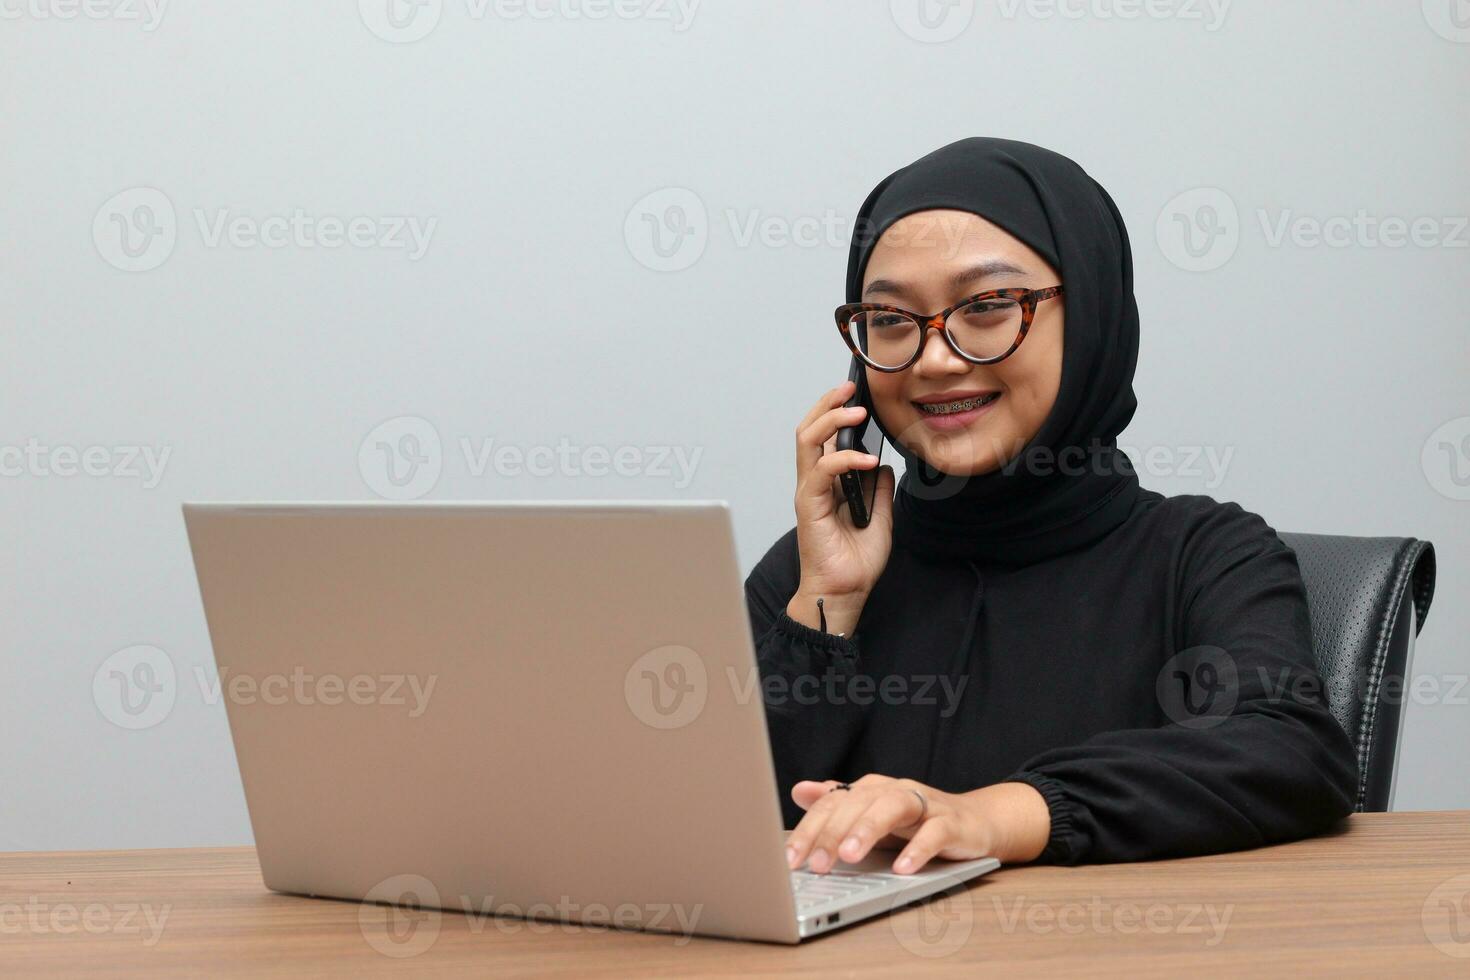 Portrait of attractive Asian hijab woman working on her laptop. Muslim girl making a phone call in office. Employee and freelance worker concept. photo